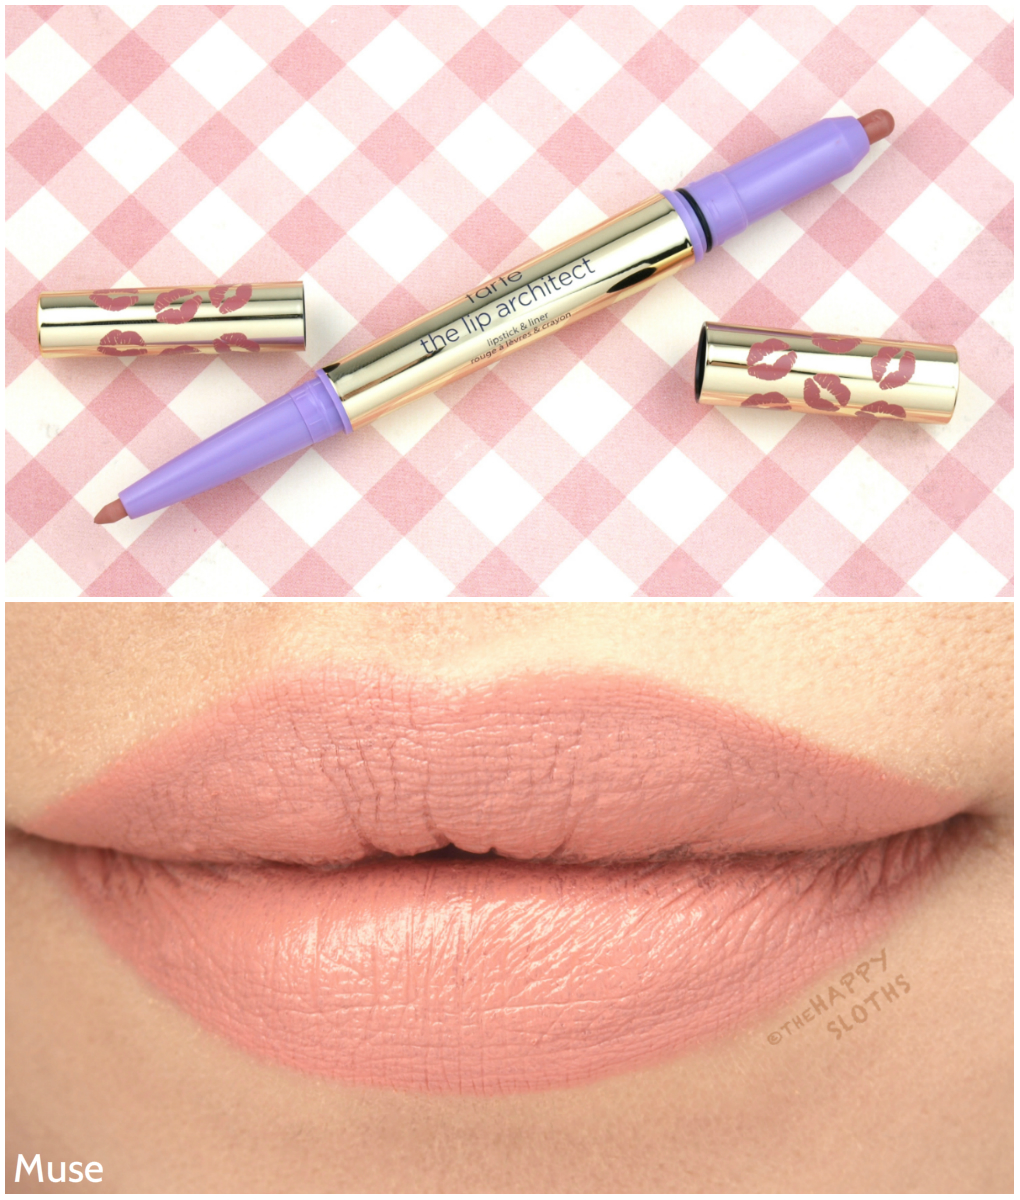 Tarte The Lip Architect Lipstick & Liner in "Muse": Review and Swatches